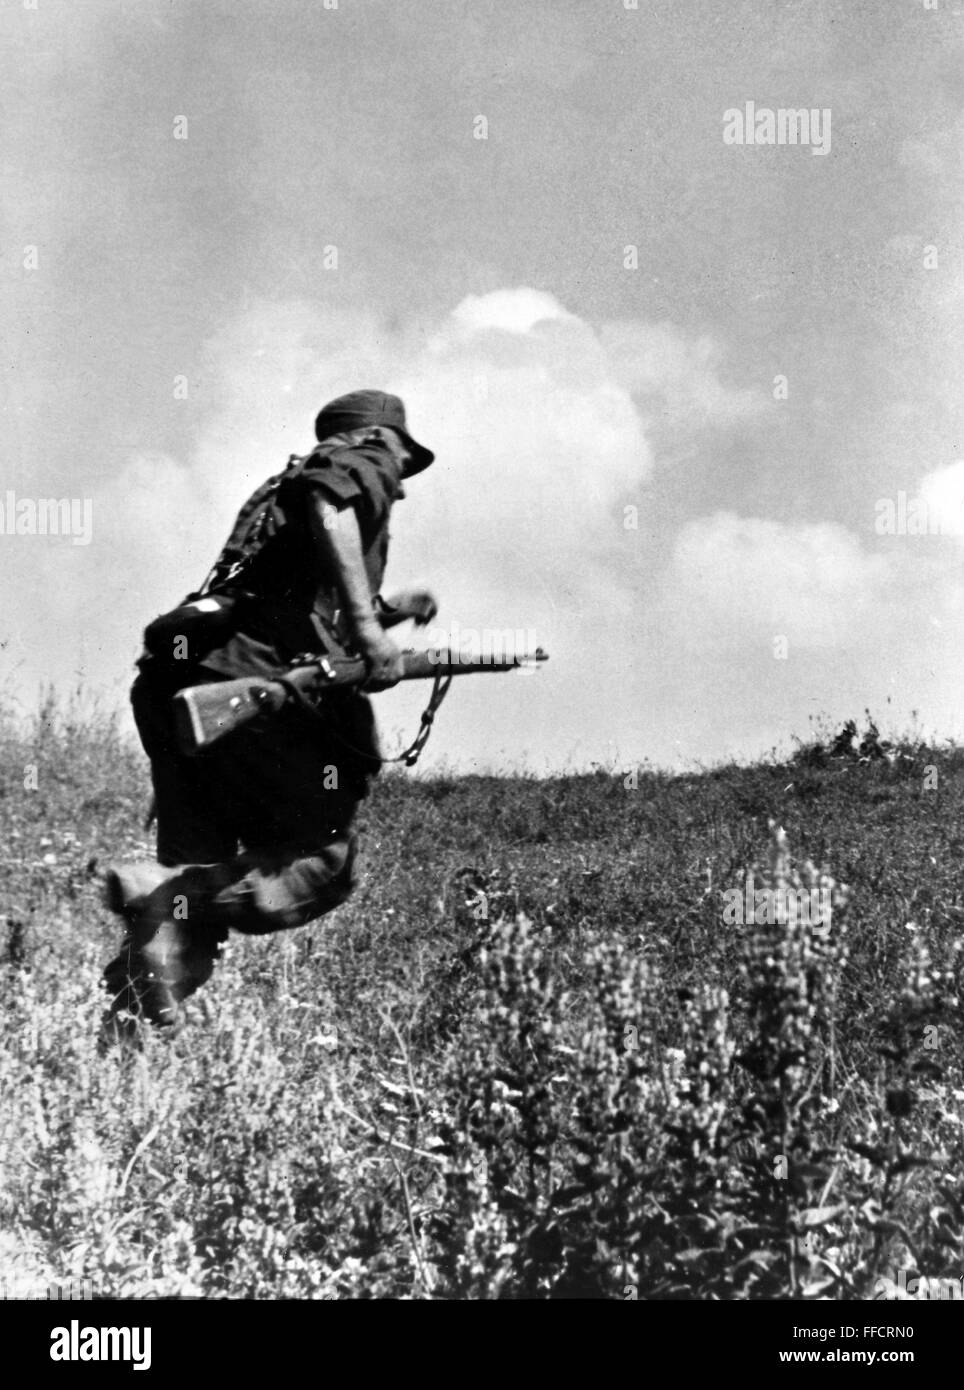 WORLD WAR II: ITALY, 1944. /nGerman mountaineer in Italy being harrassed on patrol by American rifle fire. Photographed October 1944. Stock Photo